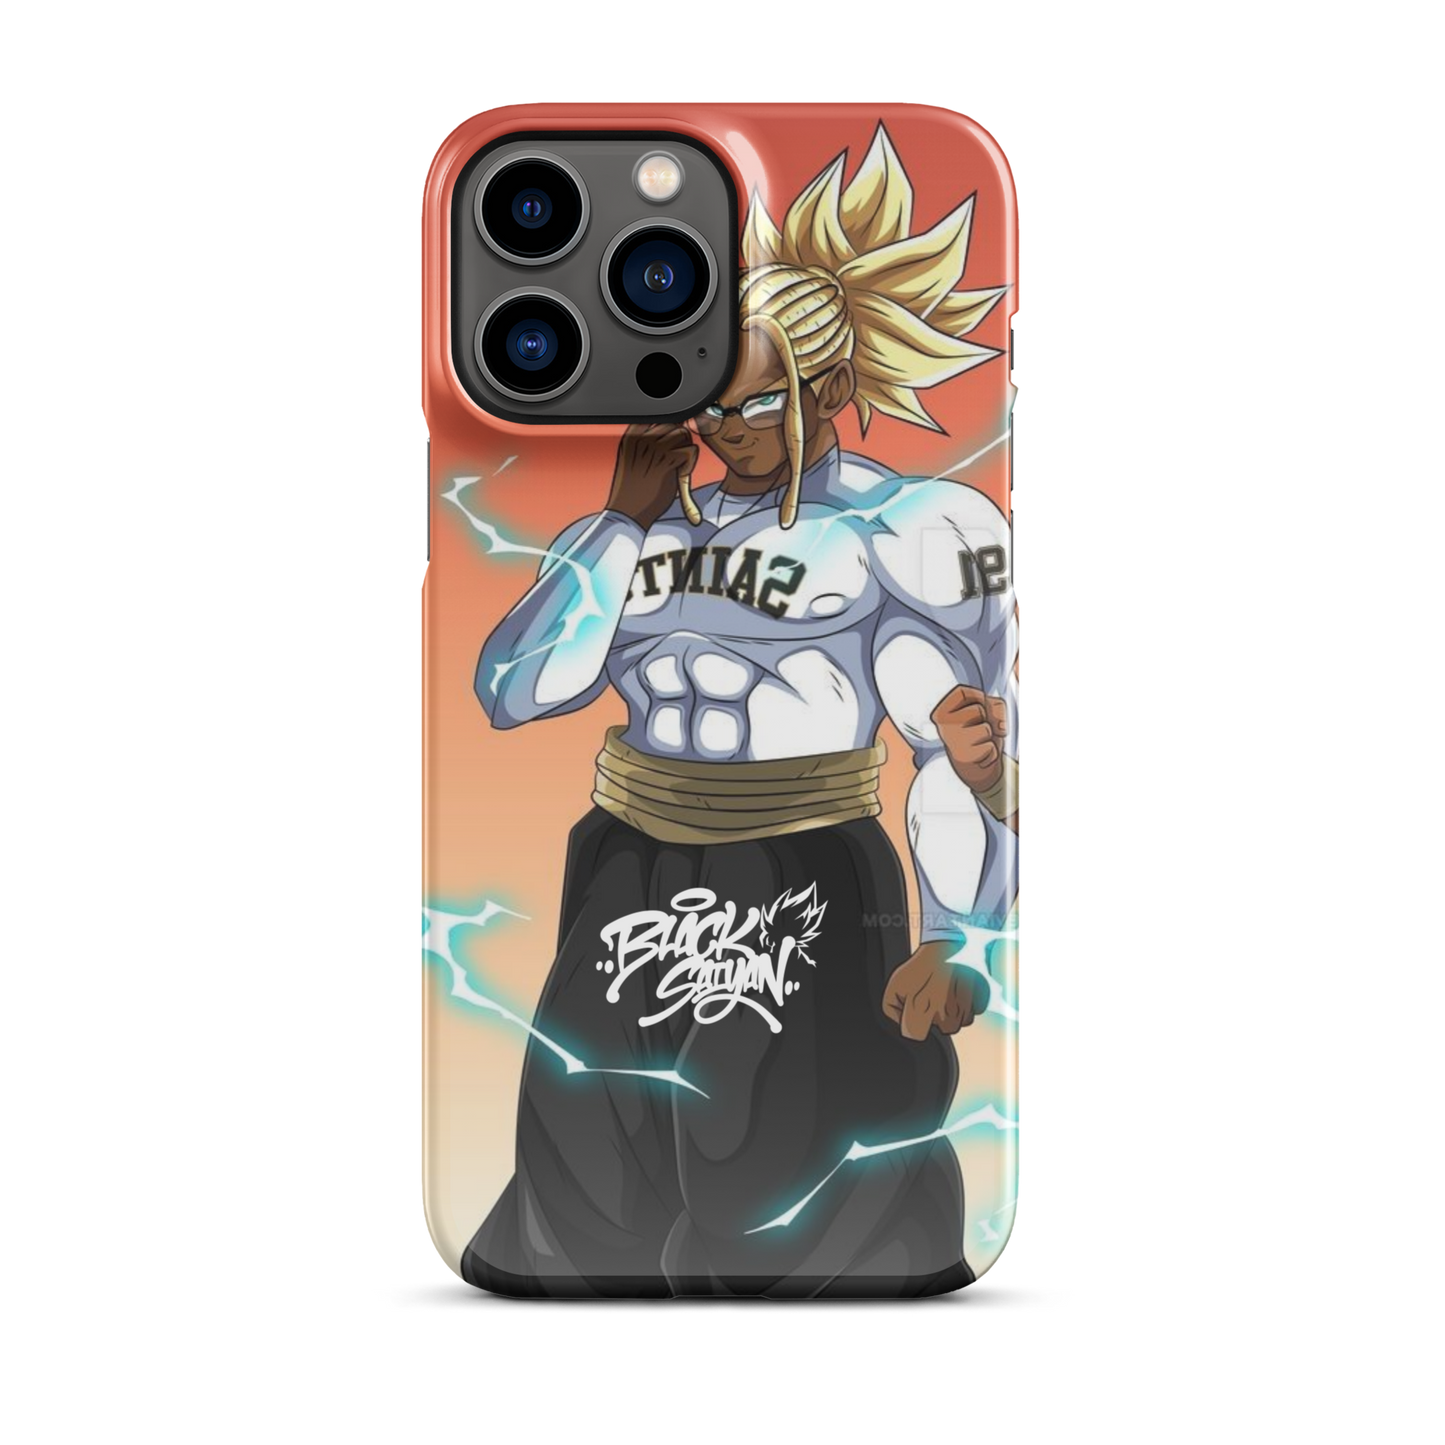 BLACK SAIYAN 1/2 COUPLE MATCHING PHONE CASES - Snap case for iPhone®